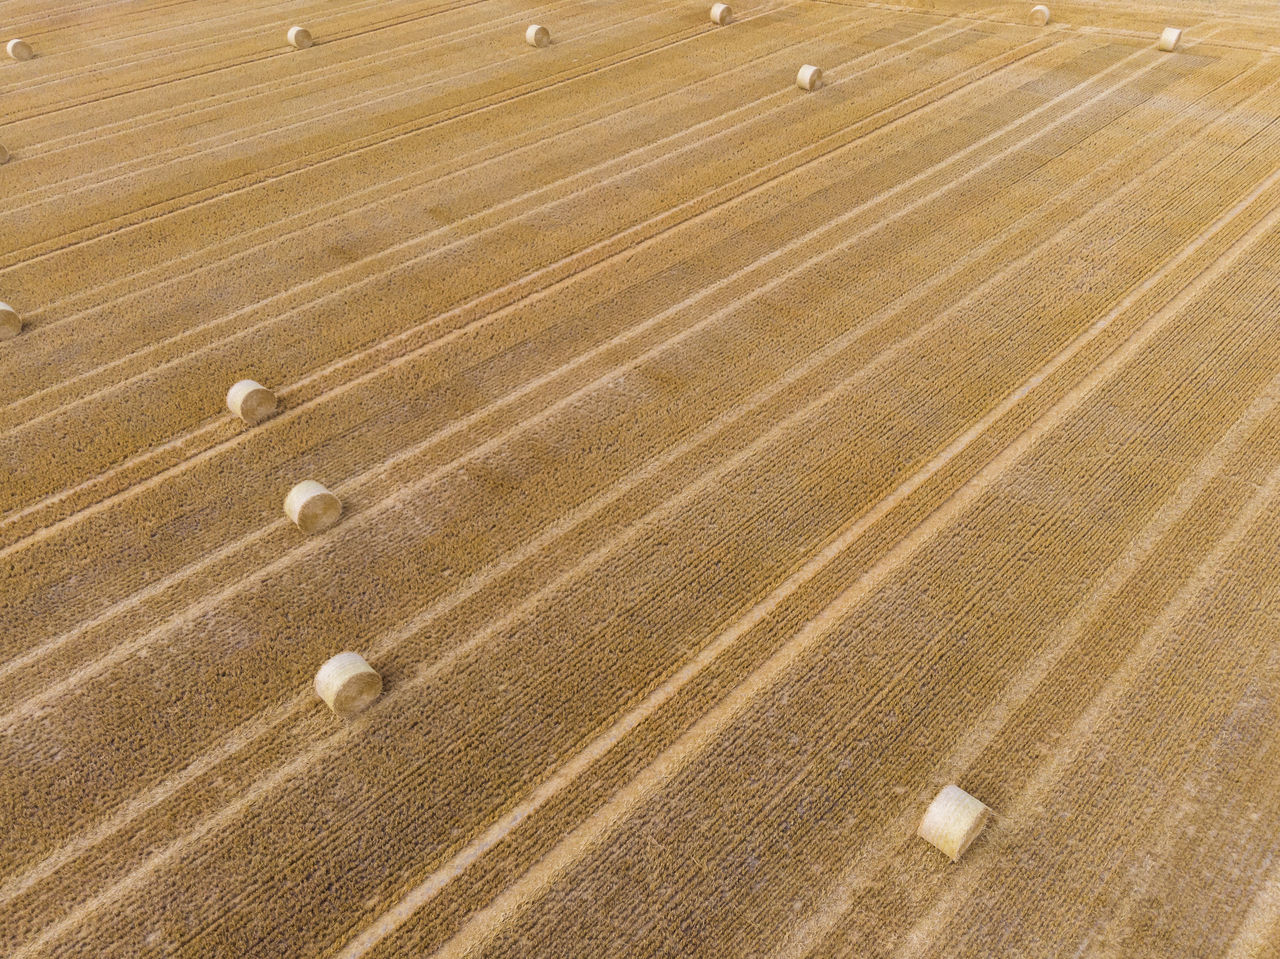 High angle view of harvested field